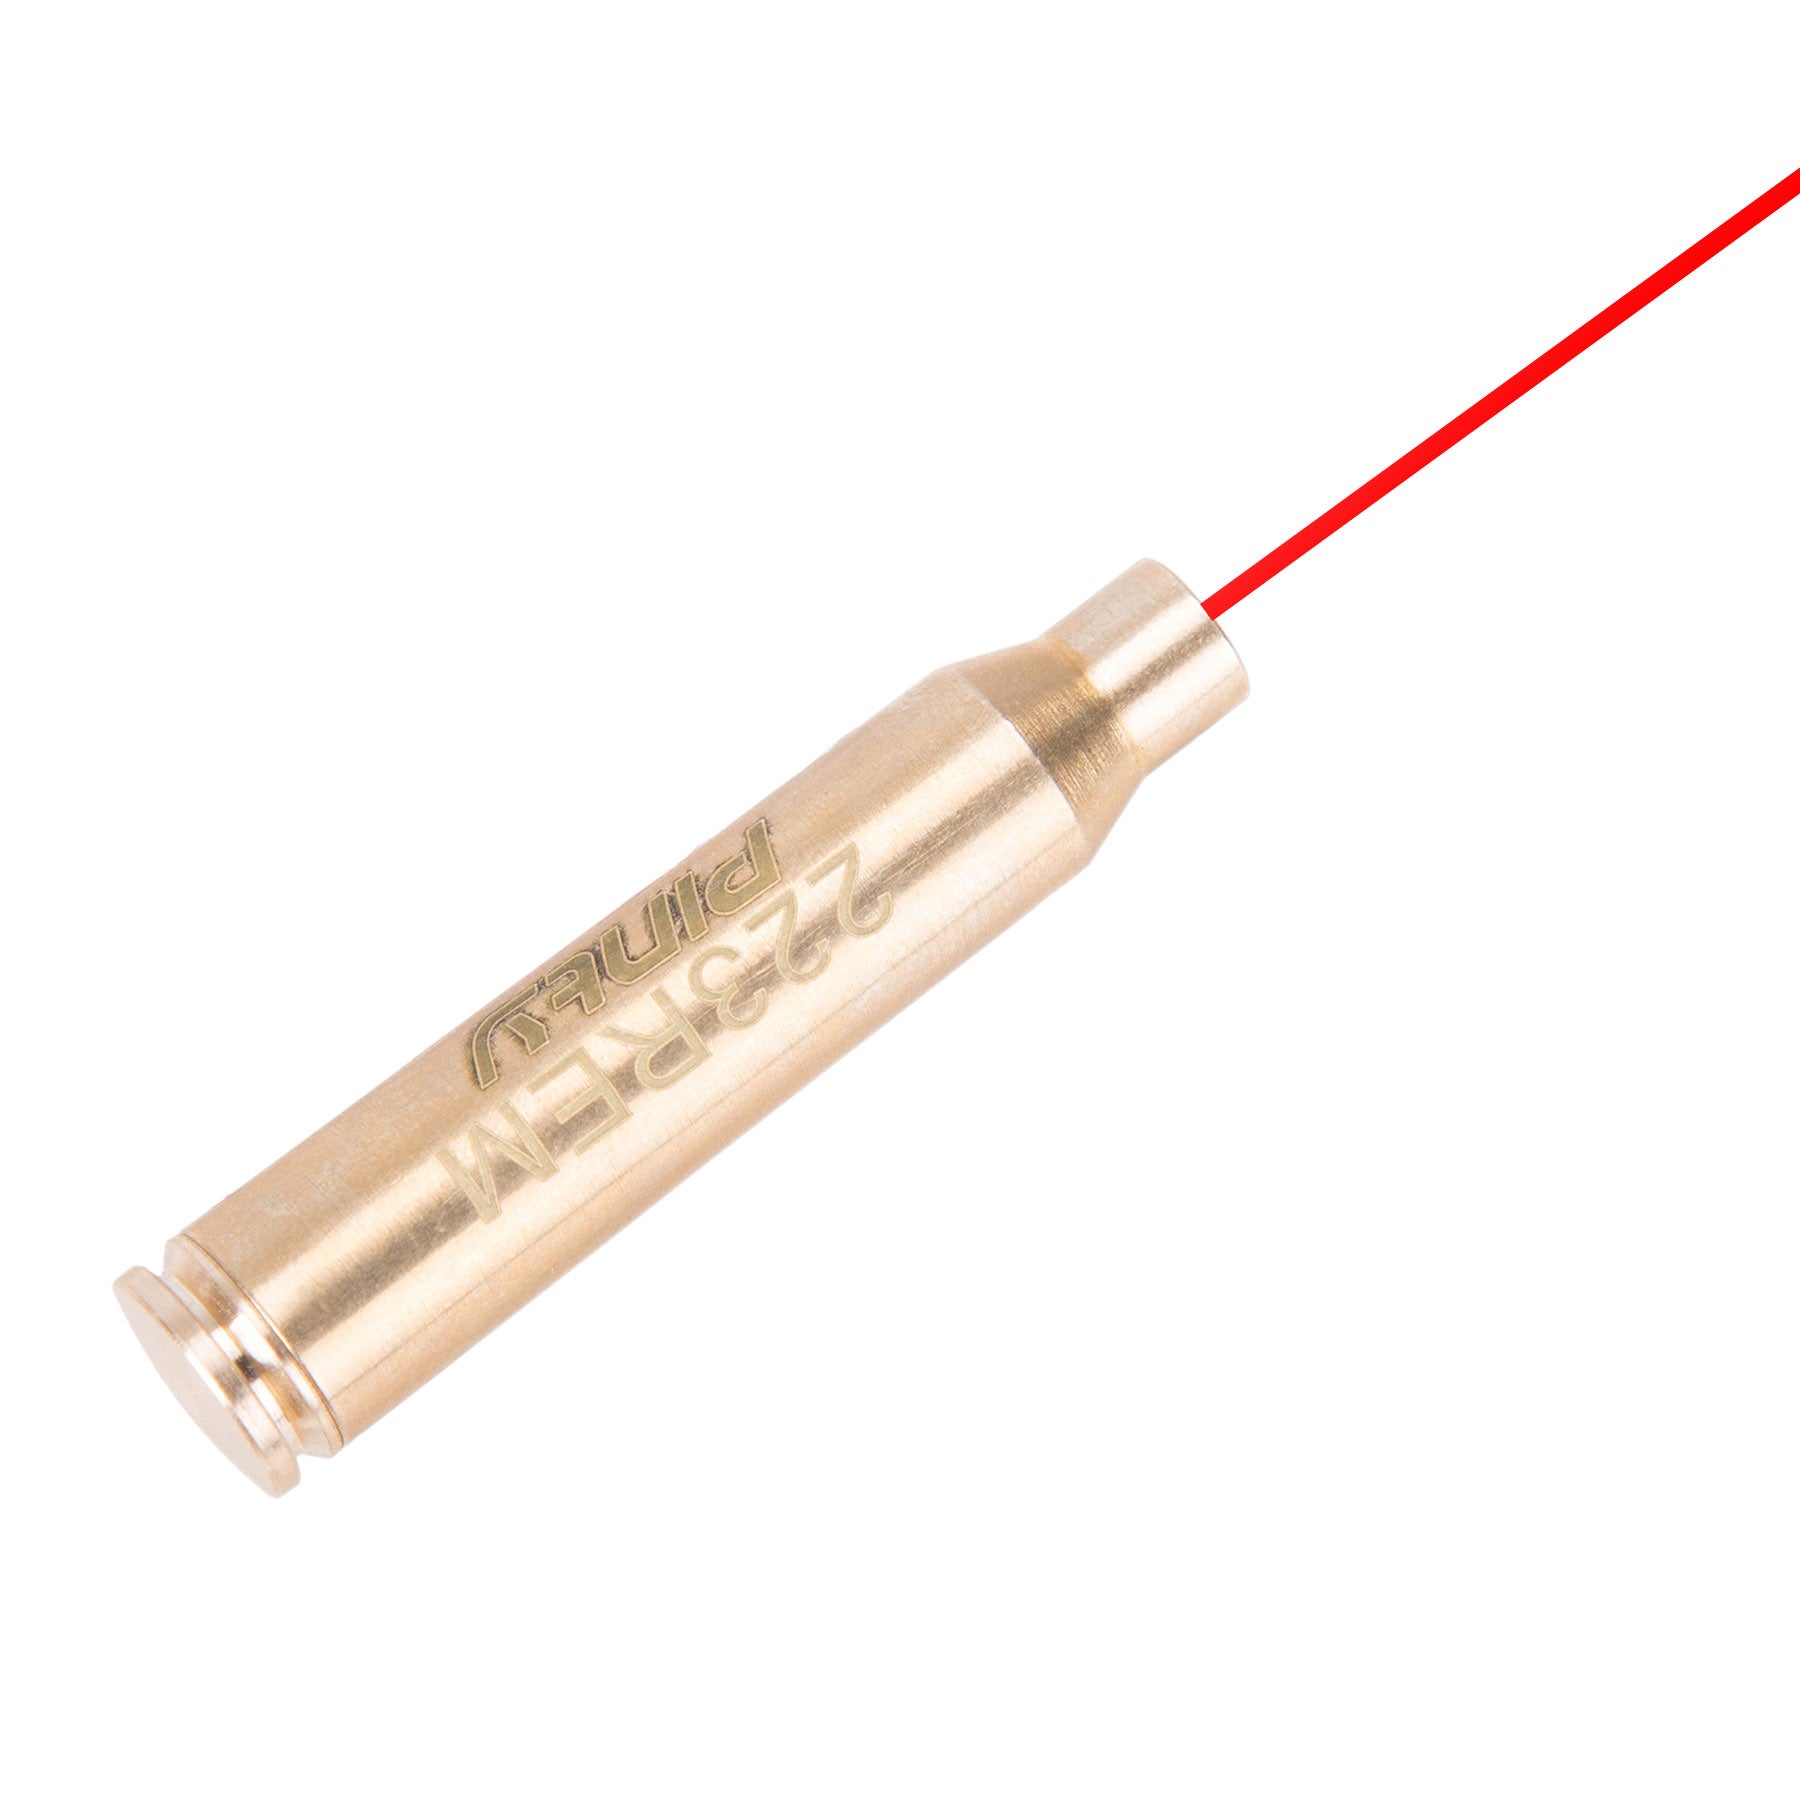 Highly-Visible Red Laser